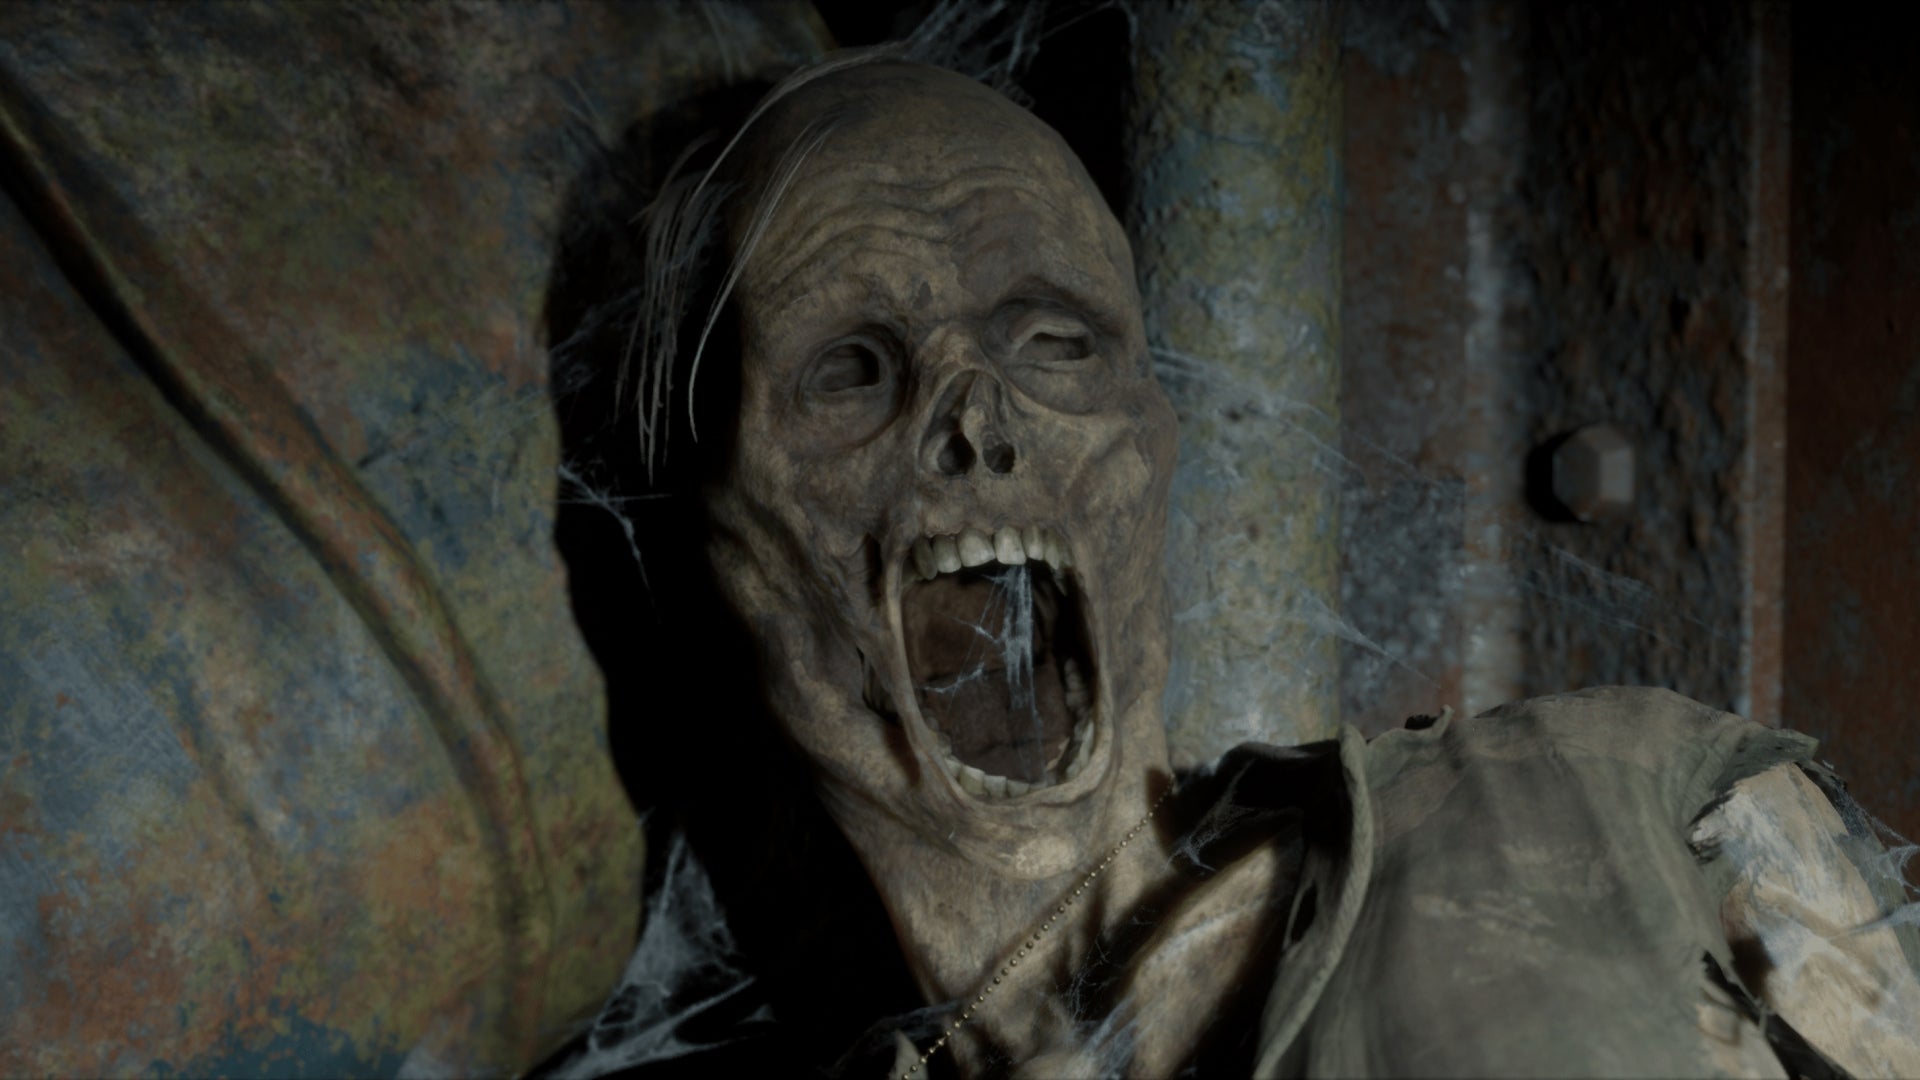 A corpse on the ghost ship in Man of Medan can be seen with its mouth open.